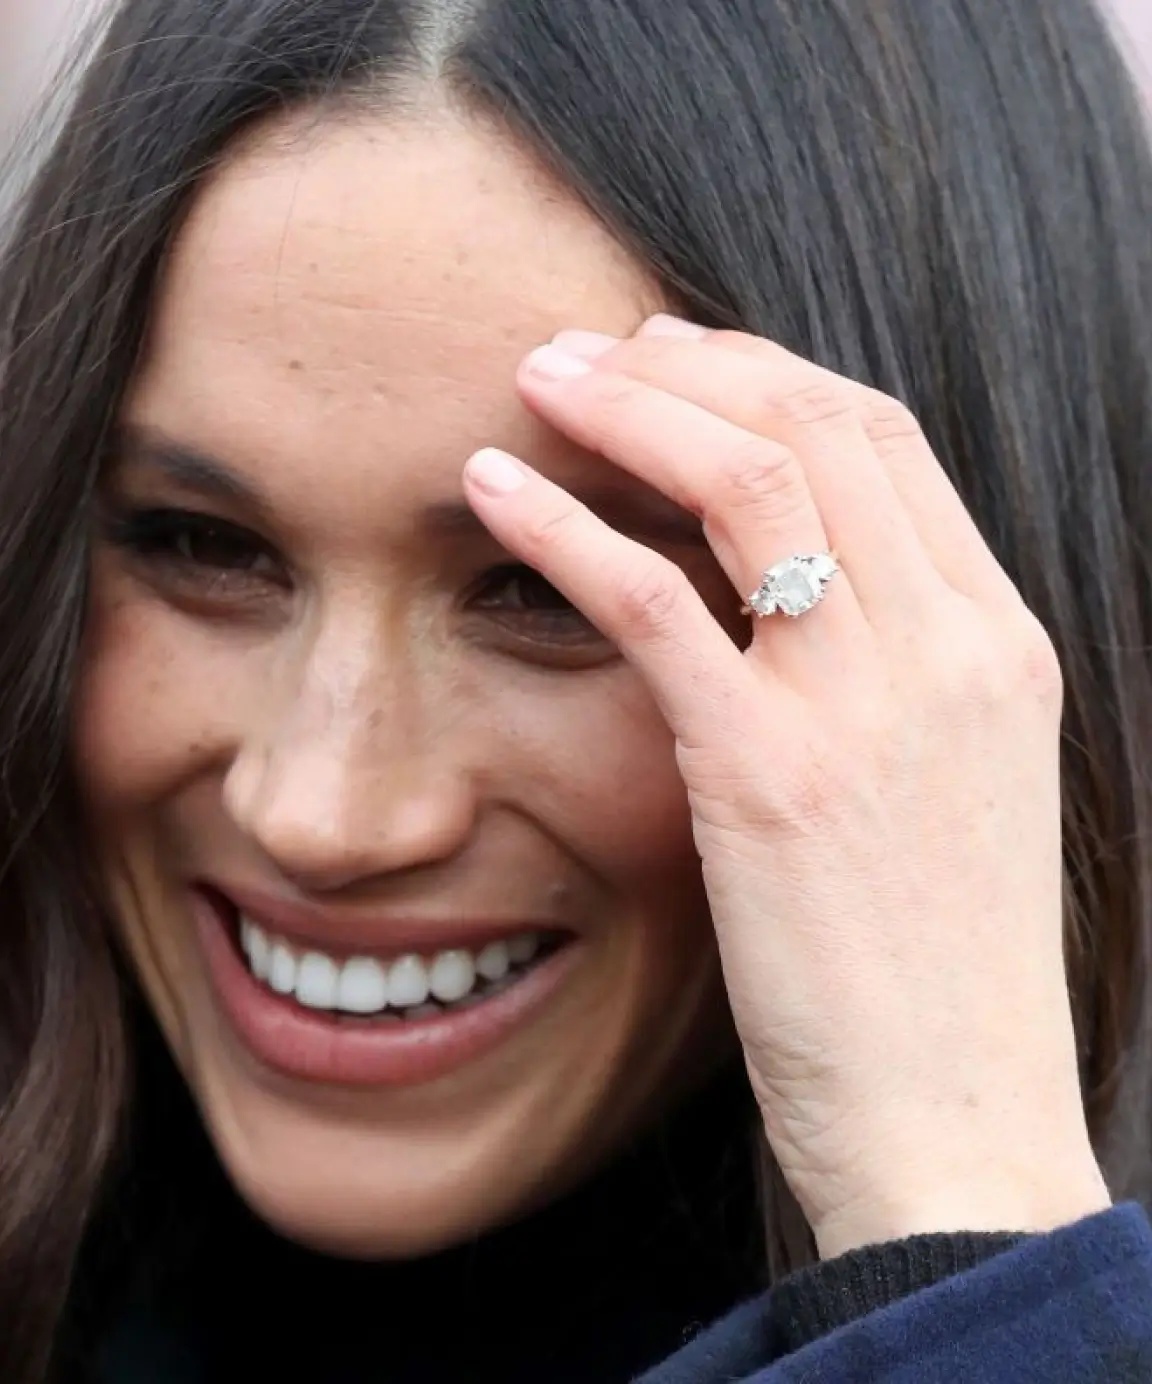 Star Studded Charms: Best Celebrity Wedding Rings